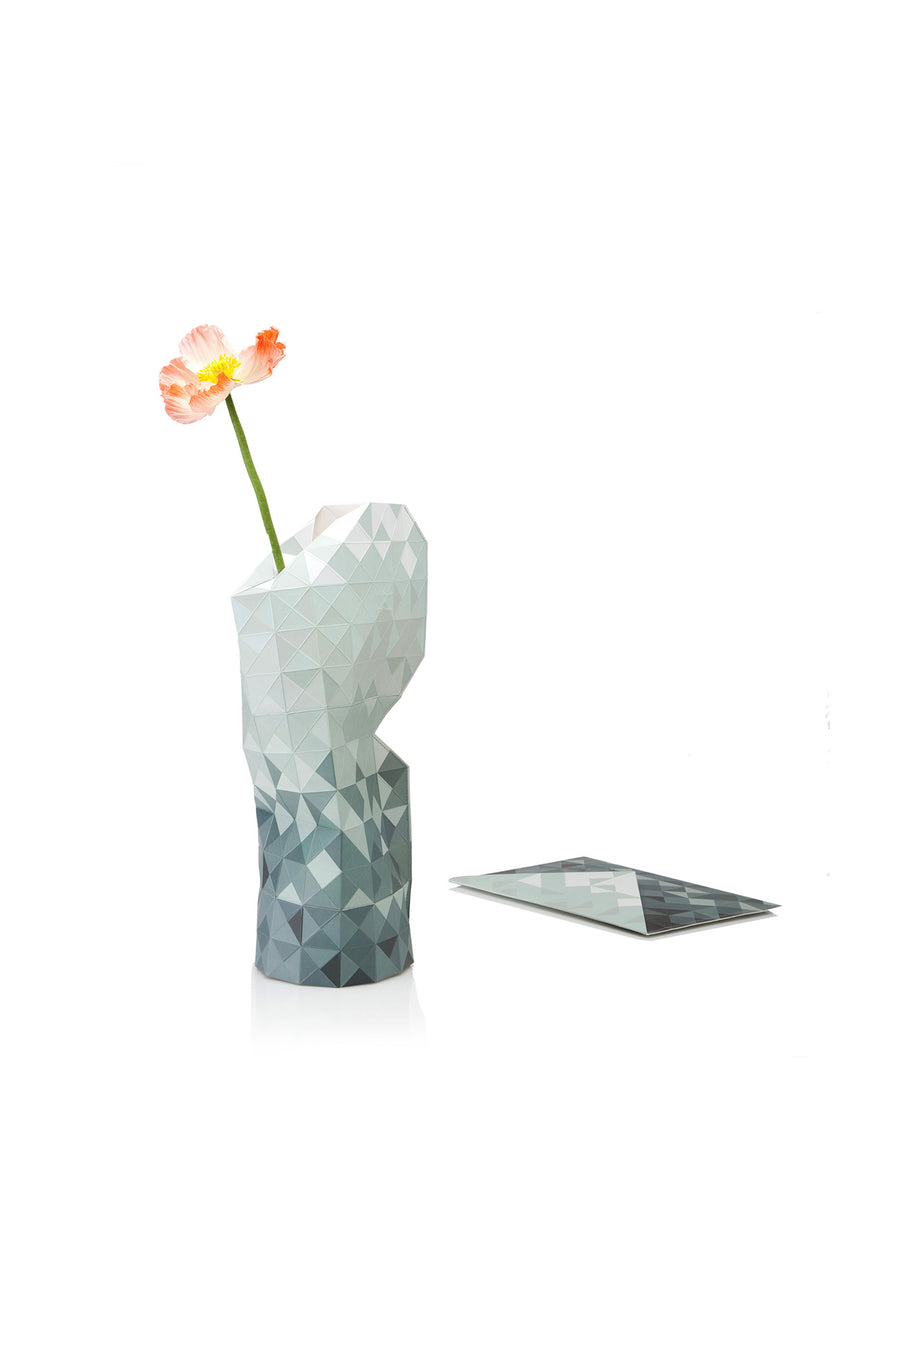 Large Grey Gradients Vase Cover, Vase, Tiny Miracles - 3LittlePicks